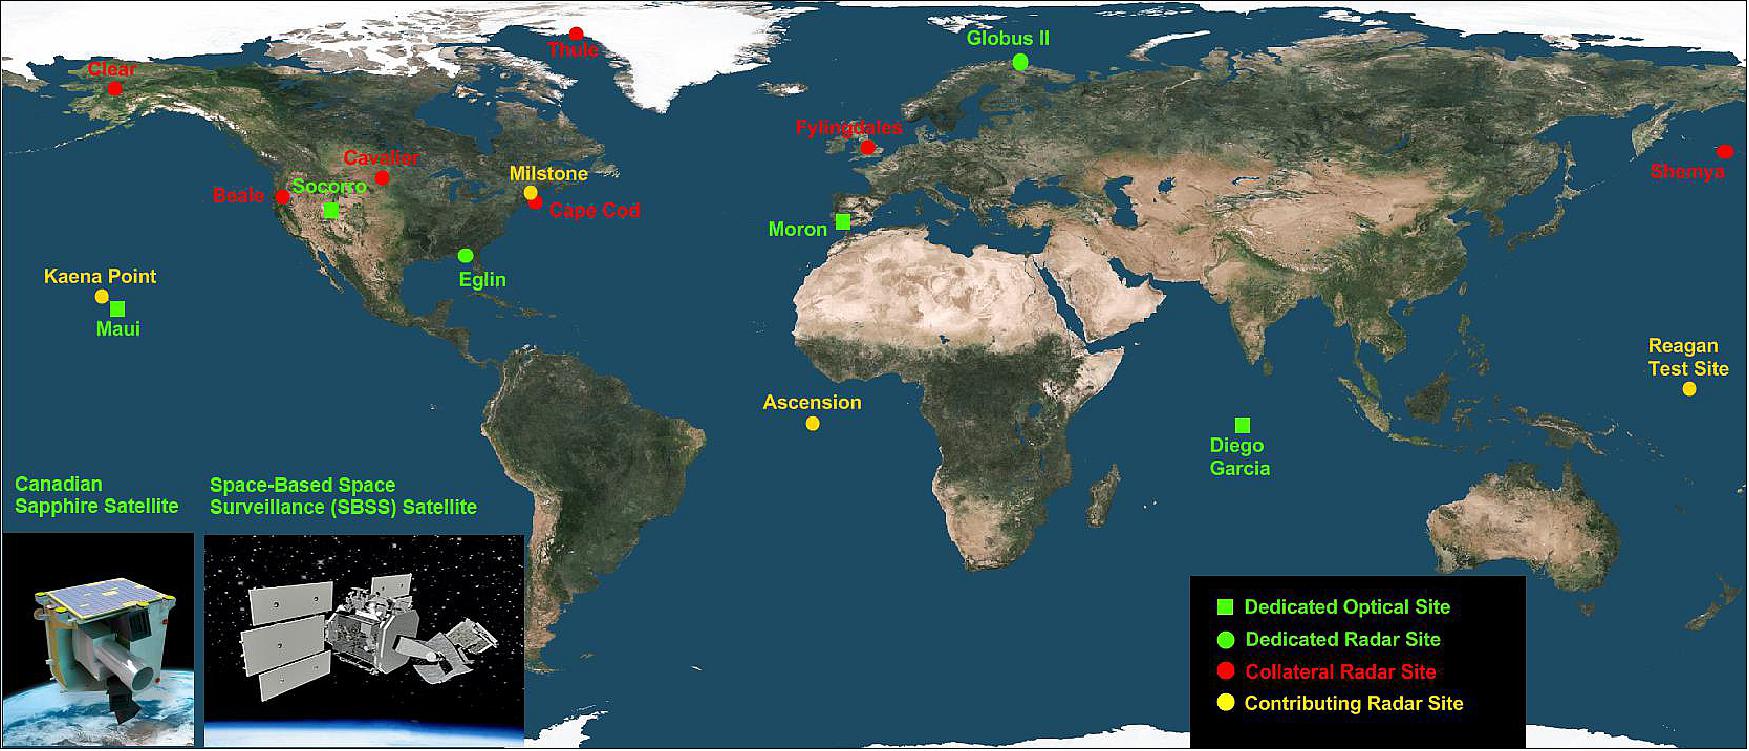 Figure 29: Overview of the US Space Surveillance Network (image credit: Secure World Foundation, Ref. 27)